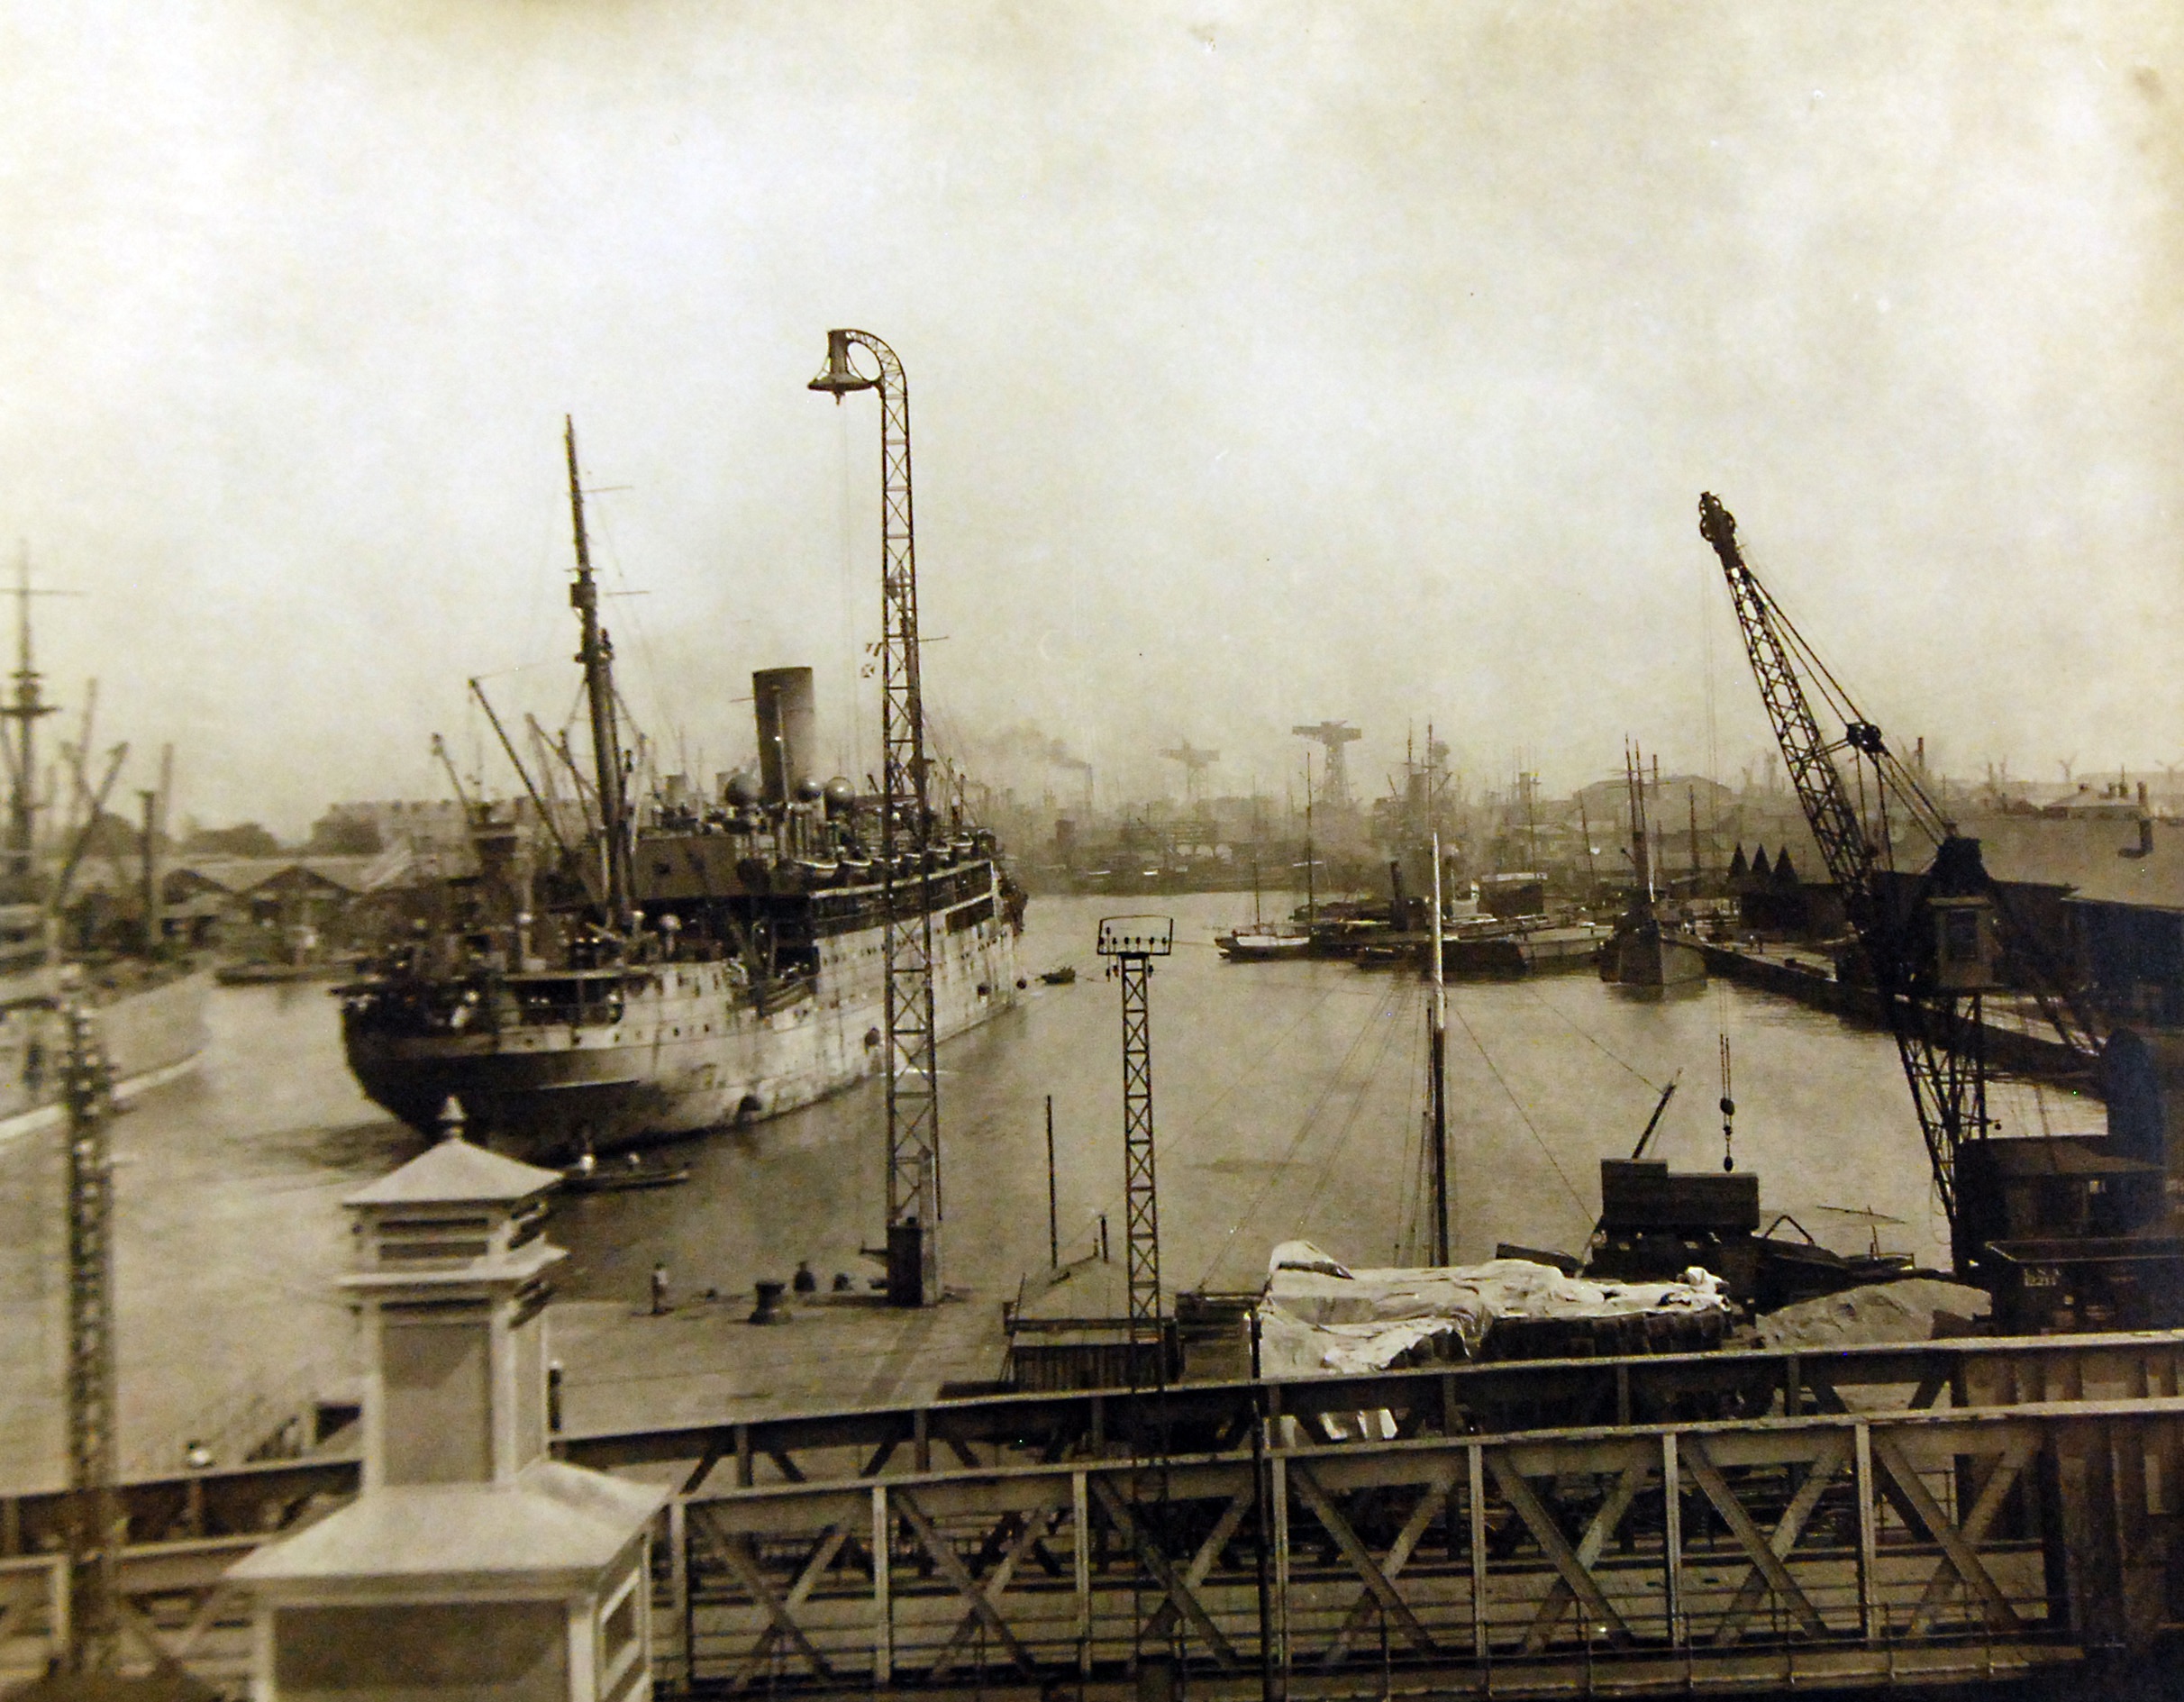 Lot-8310-2:   View of docks and harbor at St. Nazaire, Base Section No.1, St. Nazaire, France, May 31, 1918.   U.S. Army Signal Corps Photograph.   Courtesy of the Library of Congress.  (2016/07/15).